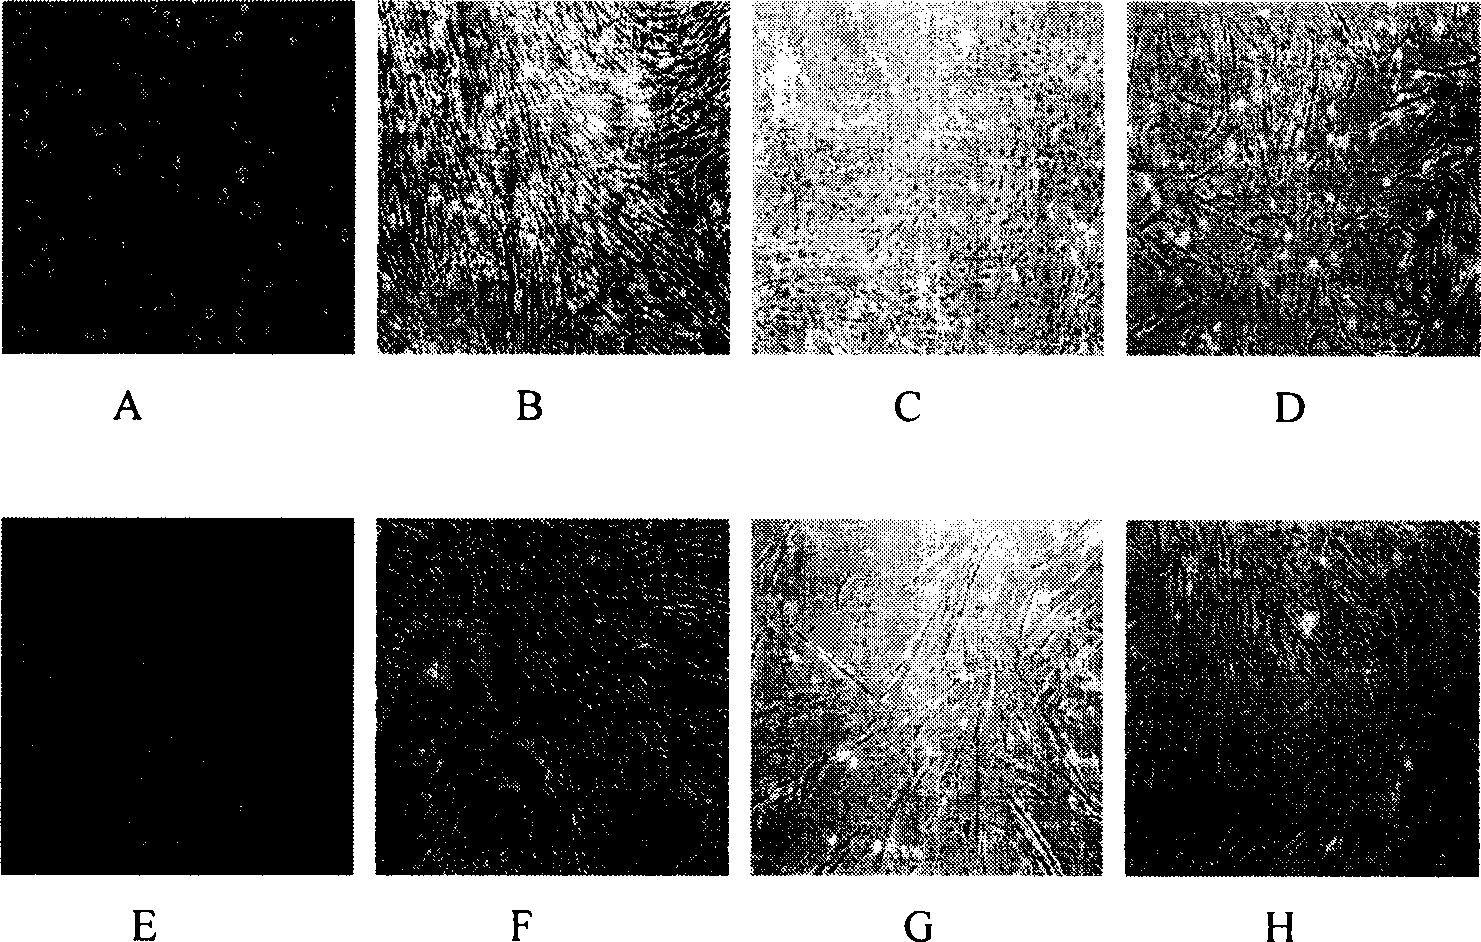 Method of inducing differentiation of human amnion mesenchyme stem cell to nerve cell